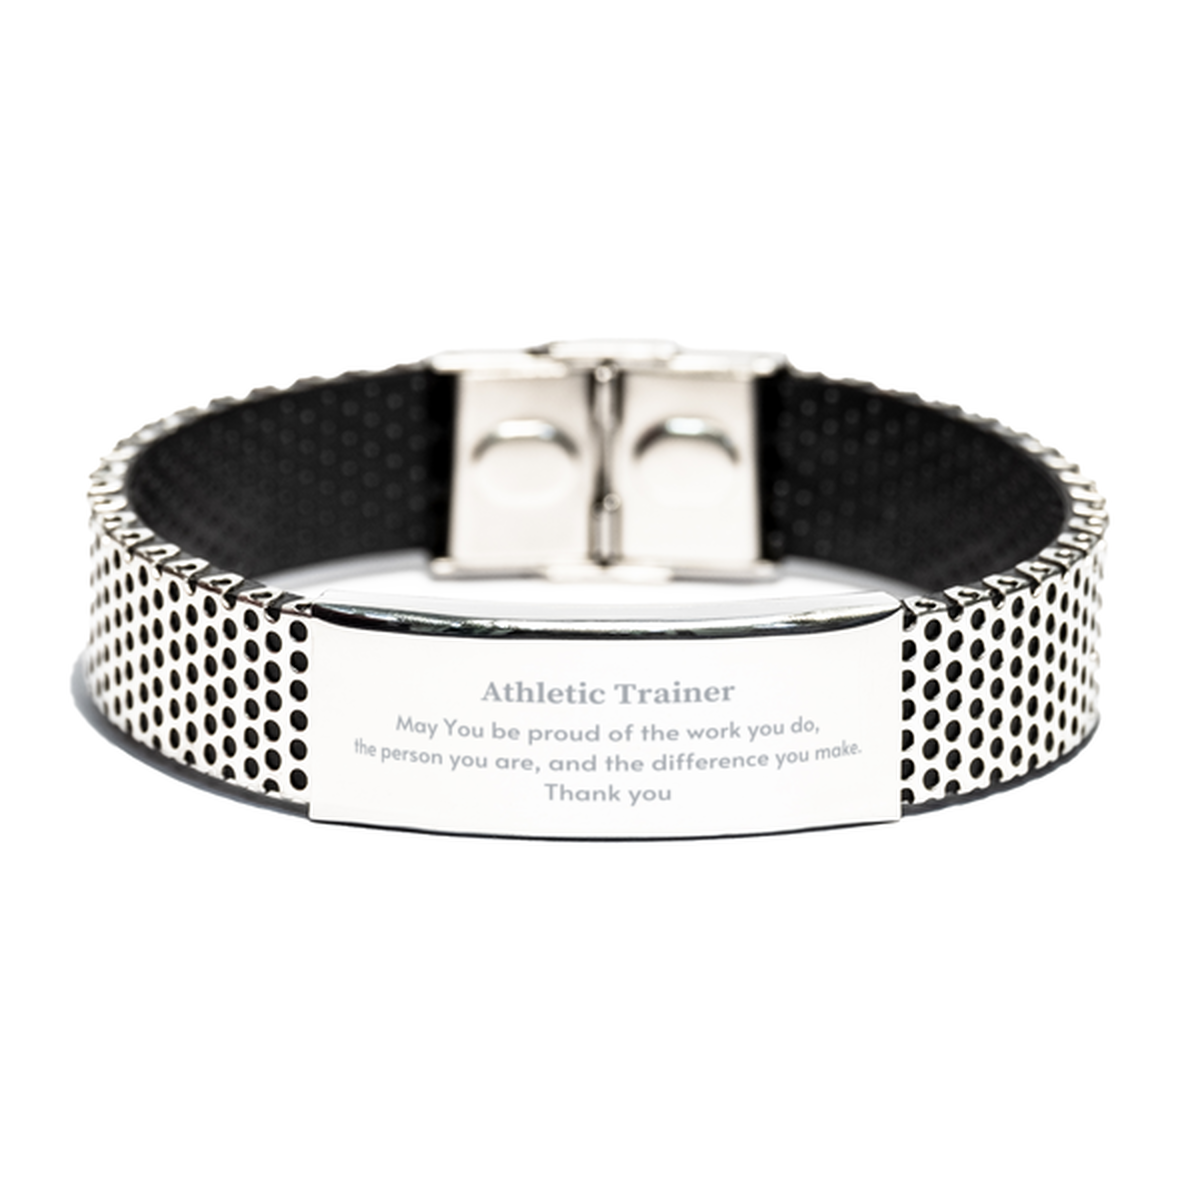 Heartwarming Stainless Steel Bracelet Retirement Coworkers Gifts for Athletic Trainer, Athletic Trainer May You be proud of the work you do, the person you are Gifts for Boss Men Women Friends